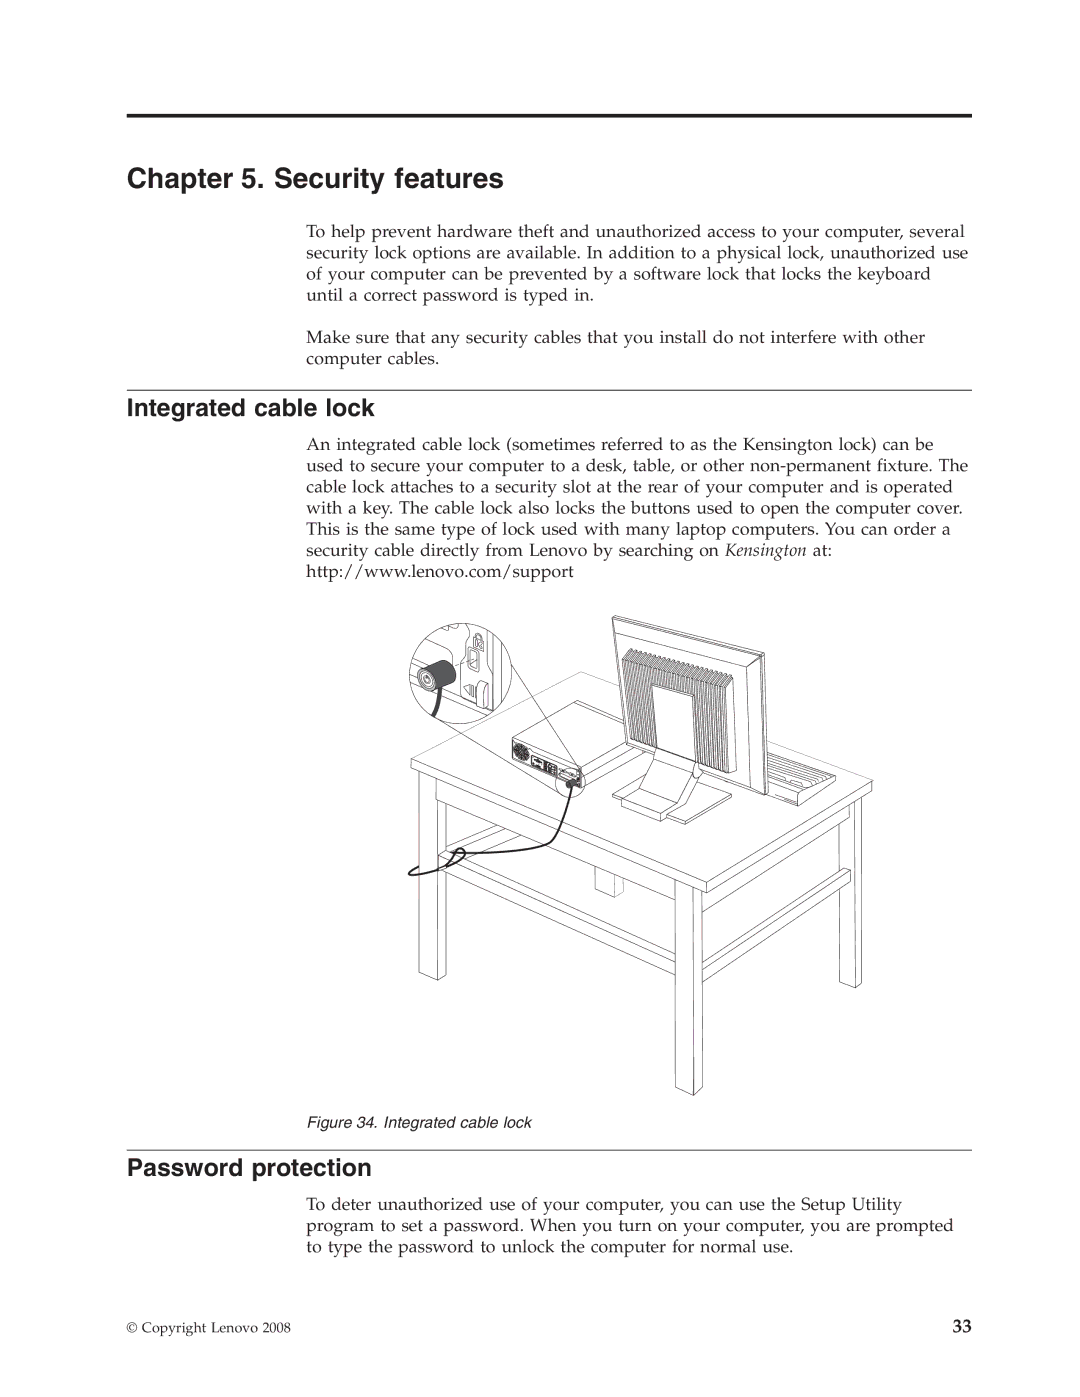 Lenovo 8336 manual Security features, Integrated cable lock, Password protection 